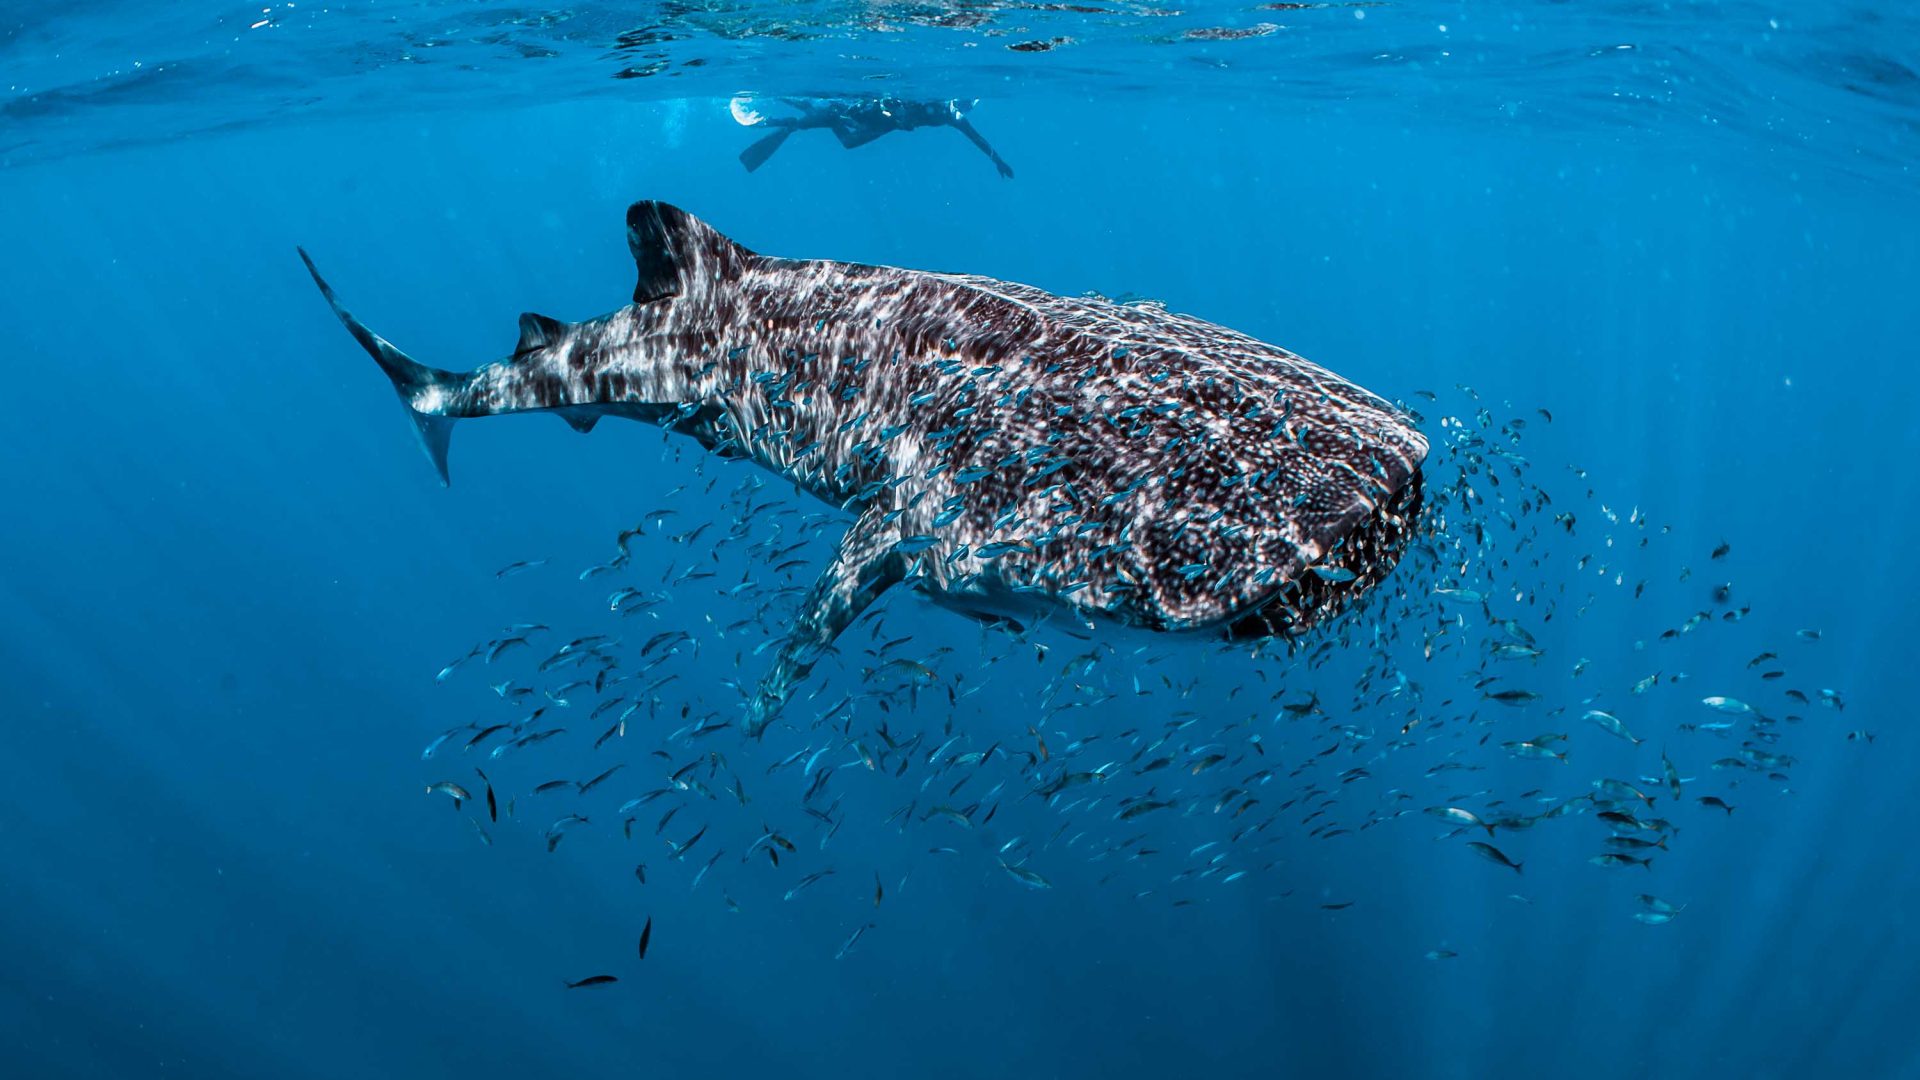 A diver swims above a whale shark which has a school of small fish swimming around it.